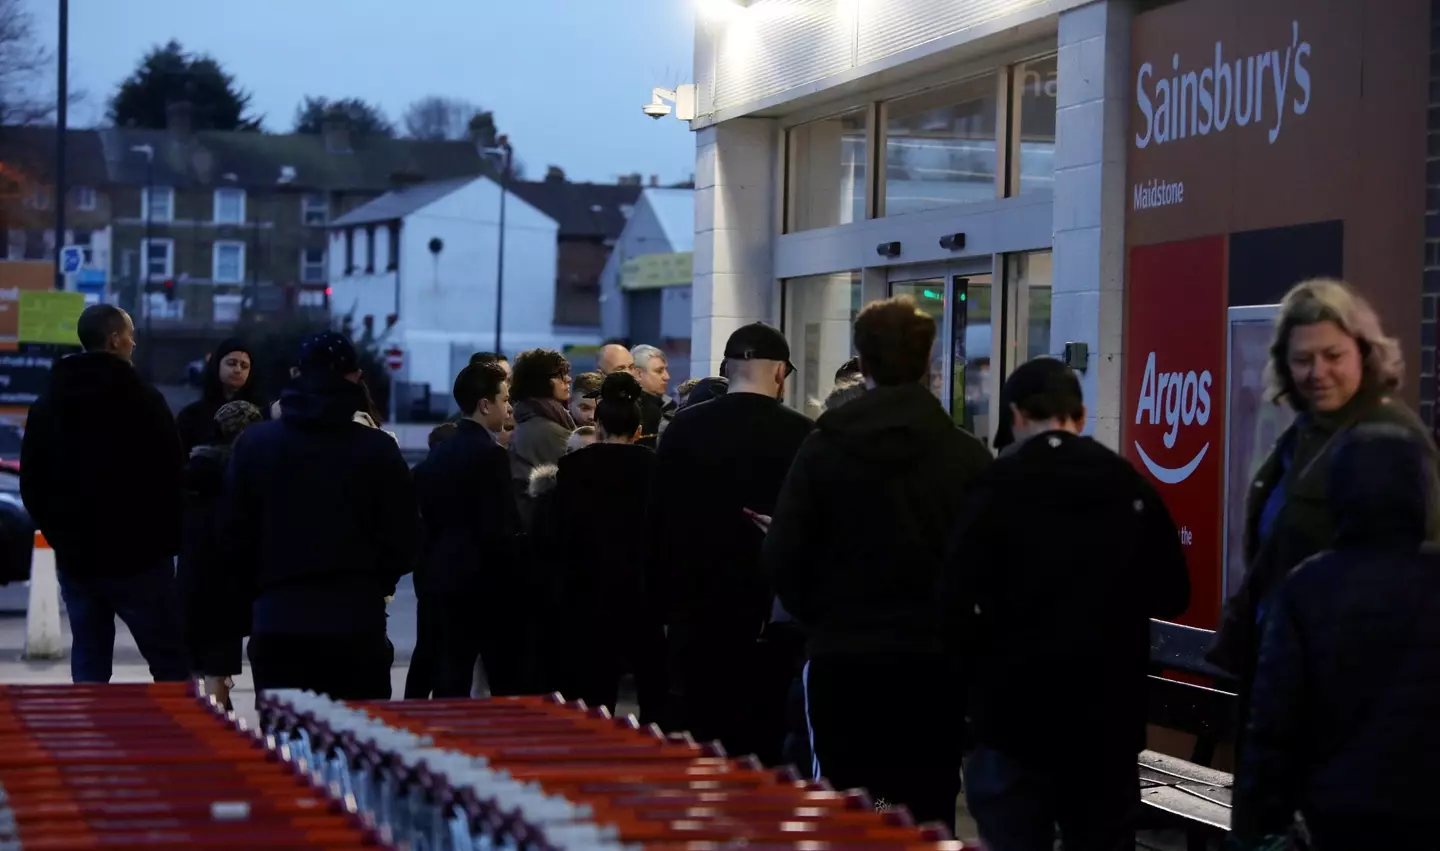 People queued outside Sainsbury's supermarkets to get Prime.